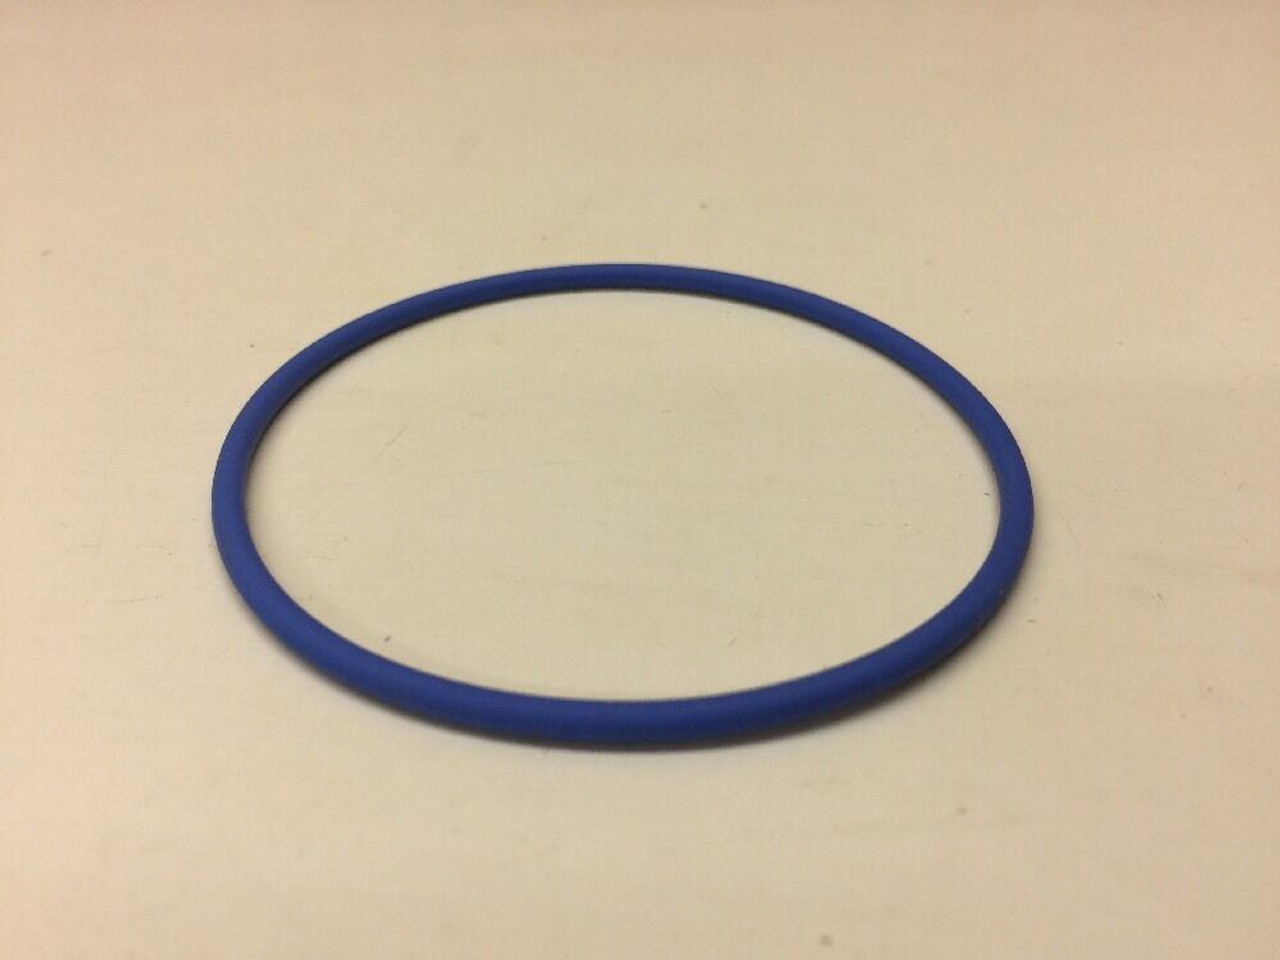 O-Ring Packing Seal AE24859-146 Eaton Blue Rubber Aircraft C-5 Lot of 5